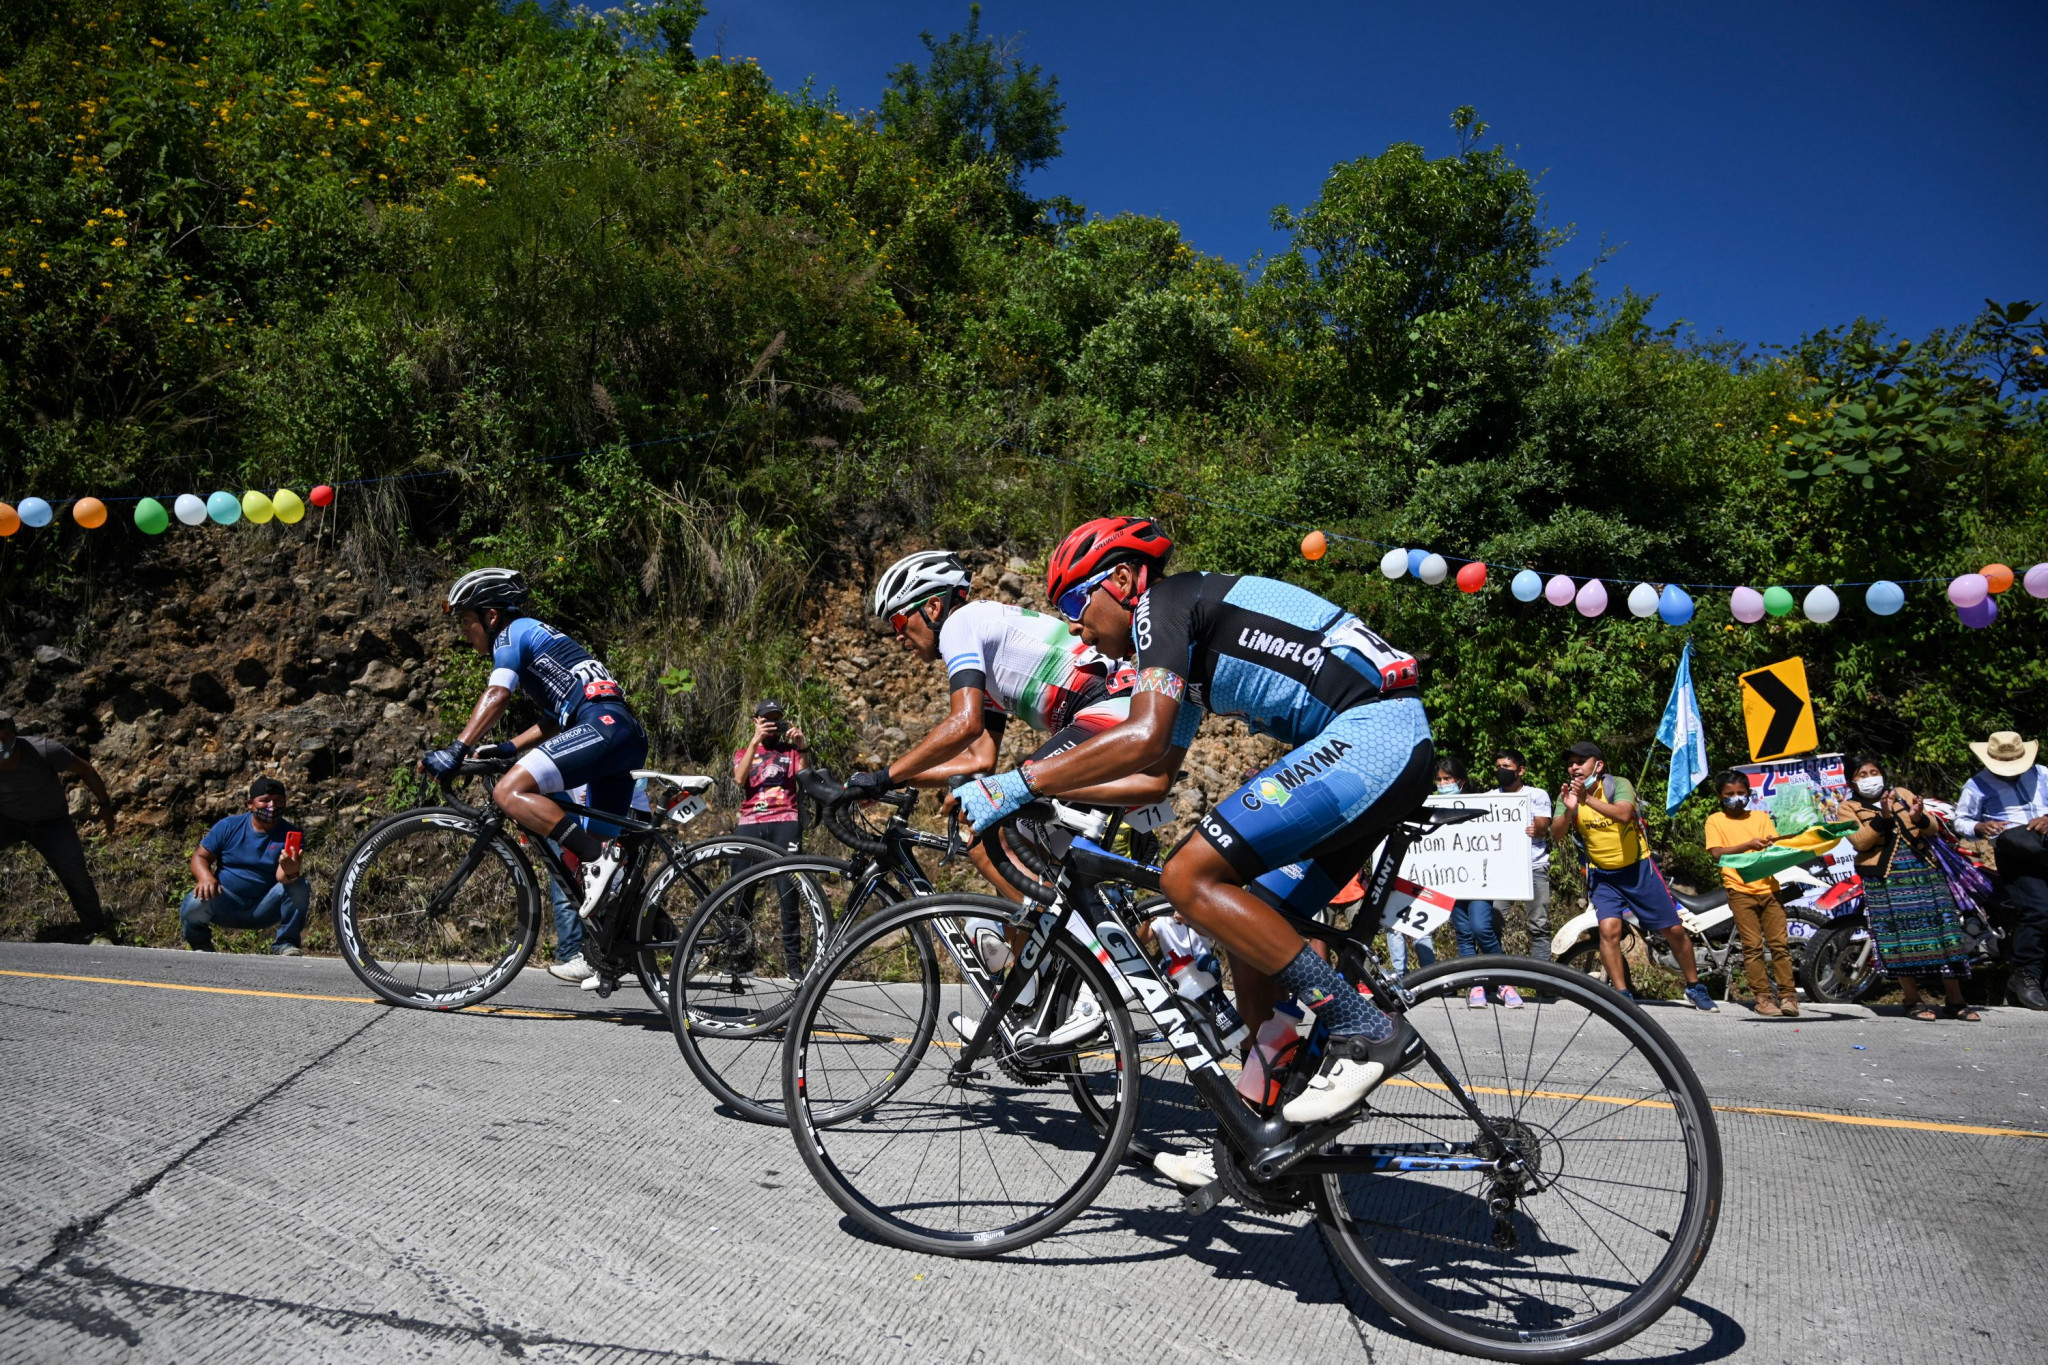 Organisers of the Vuelta a San Juan had considered staging it with just local riders before pulling the plug on this year's event ©Getty Images